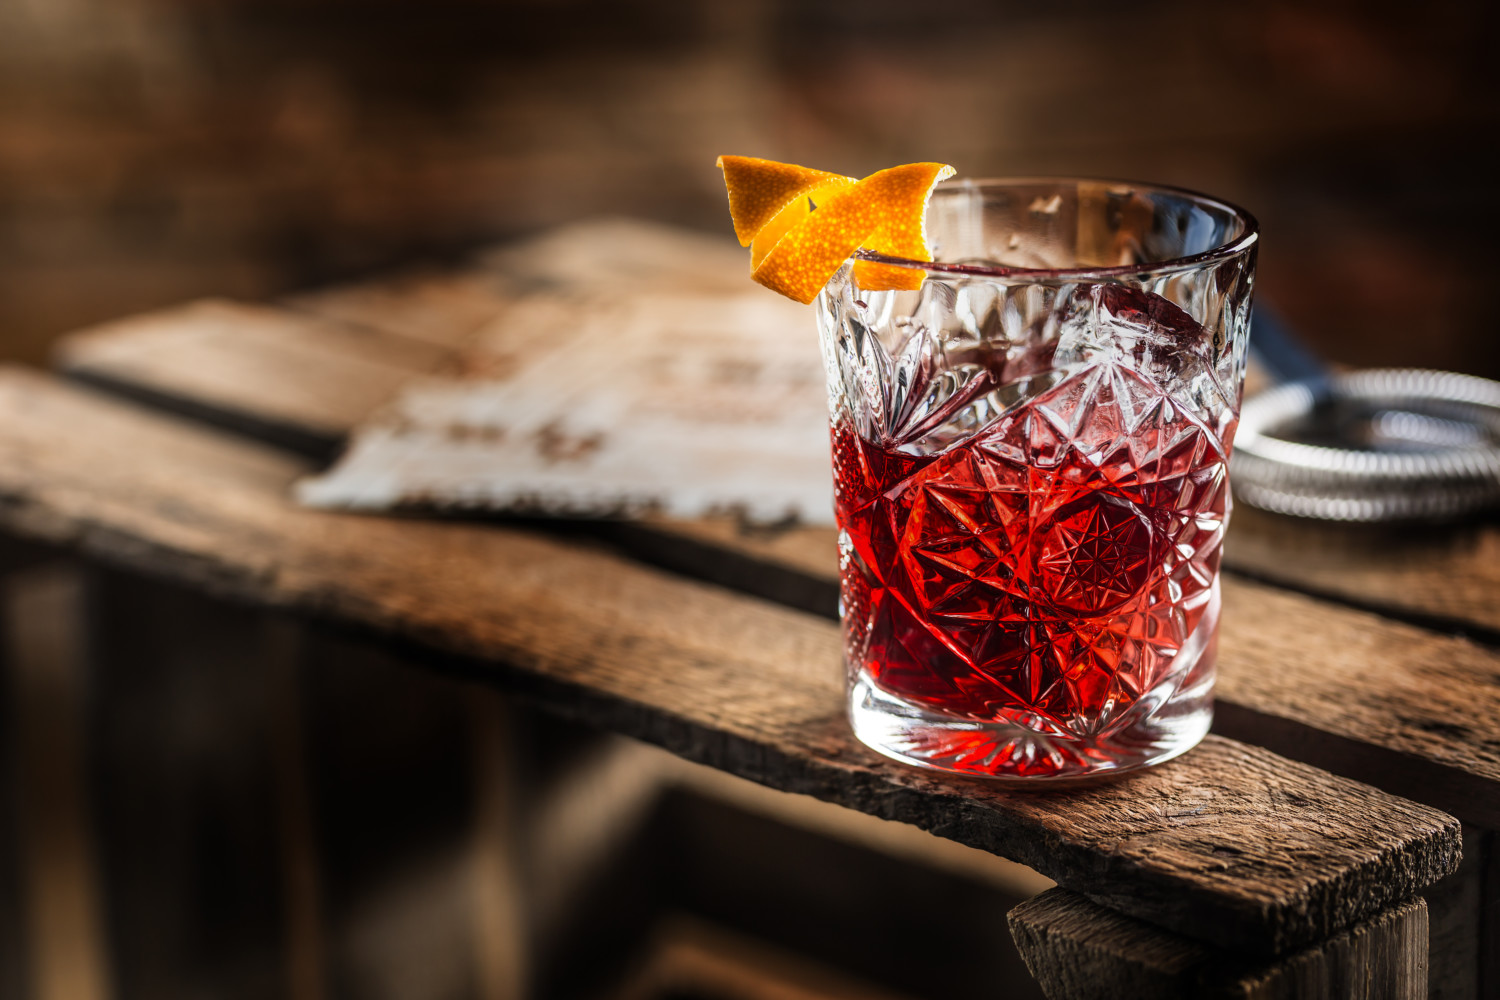 Negroni - one of the most popular cocktails in the world